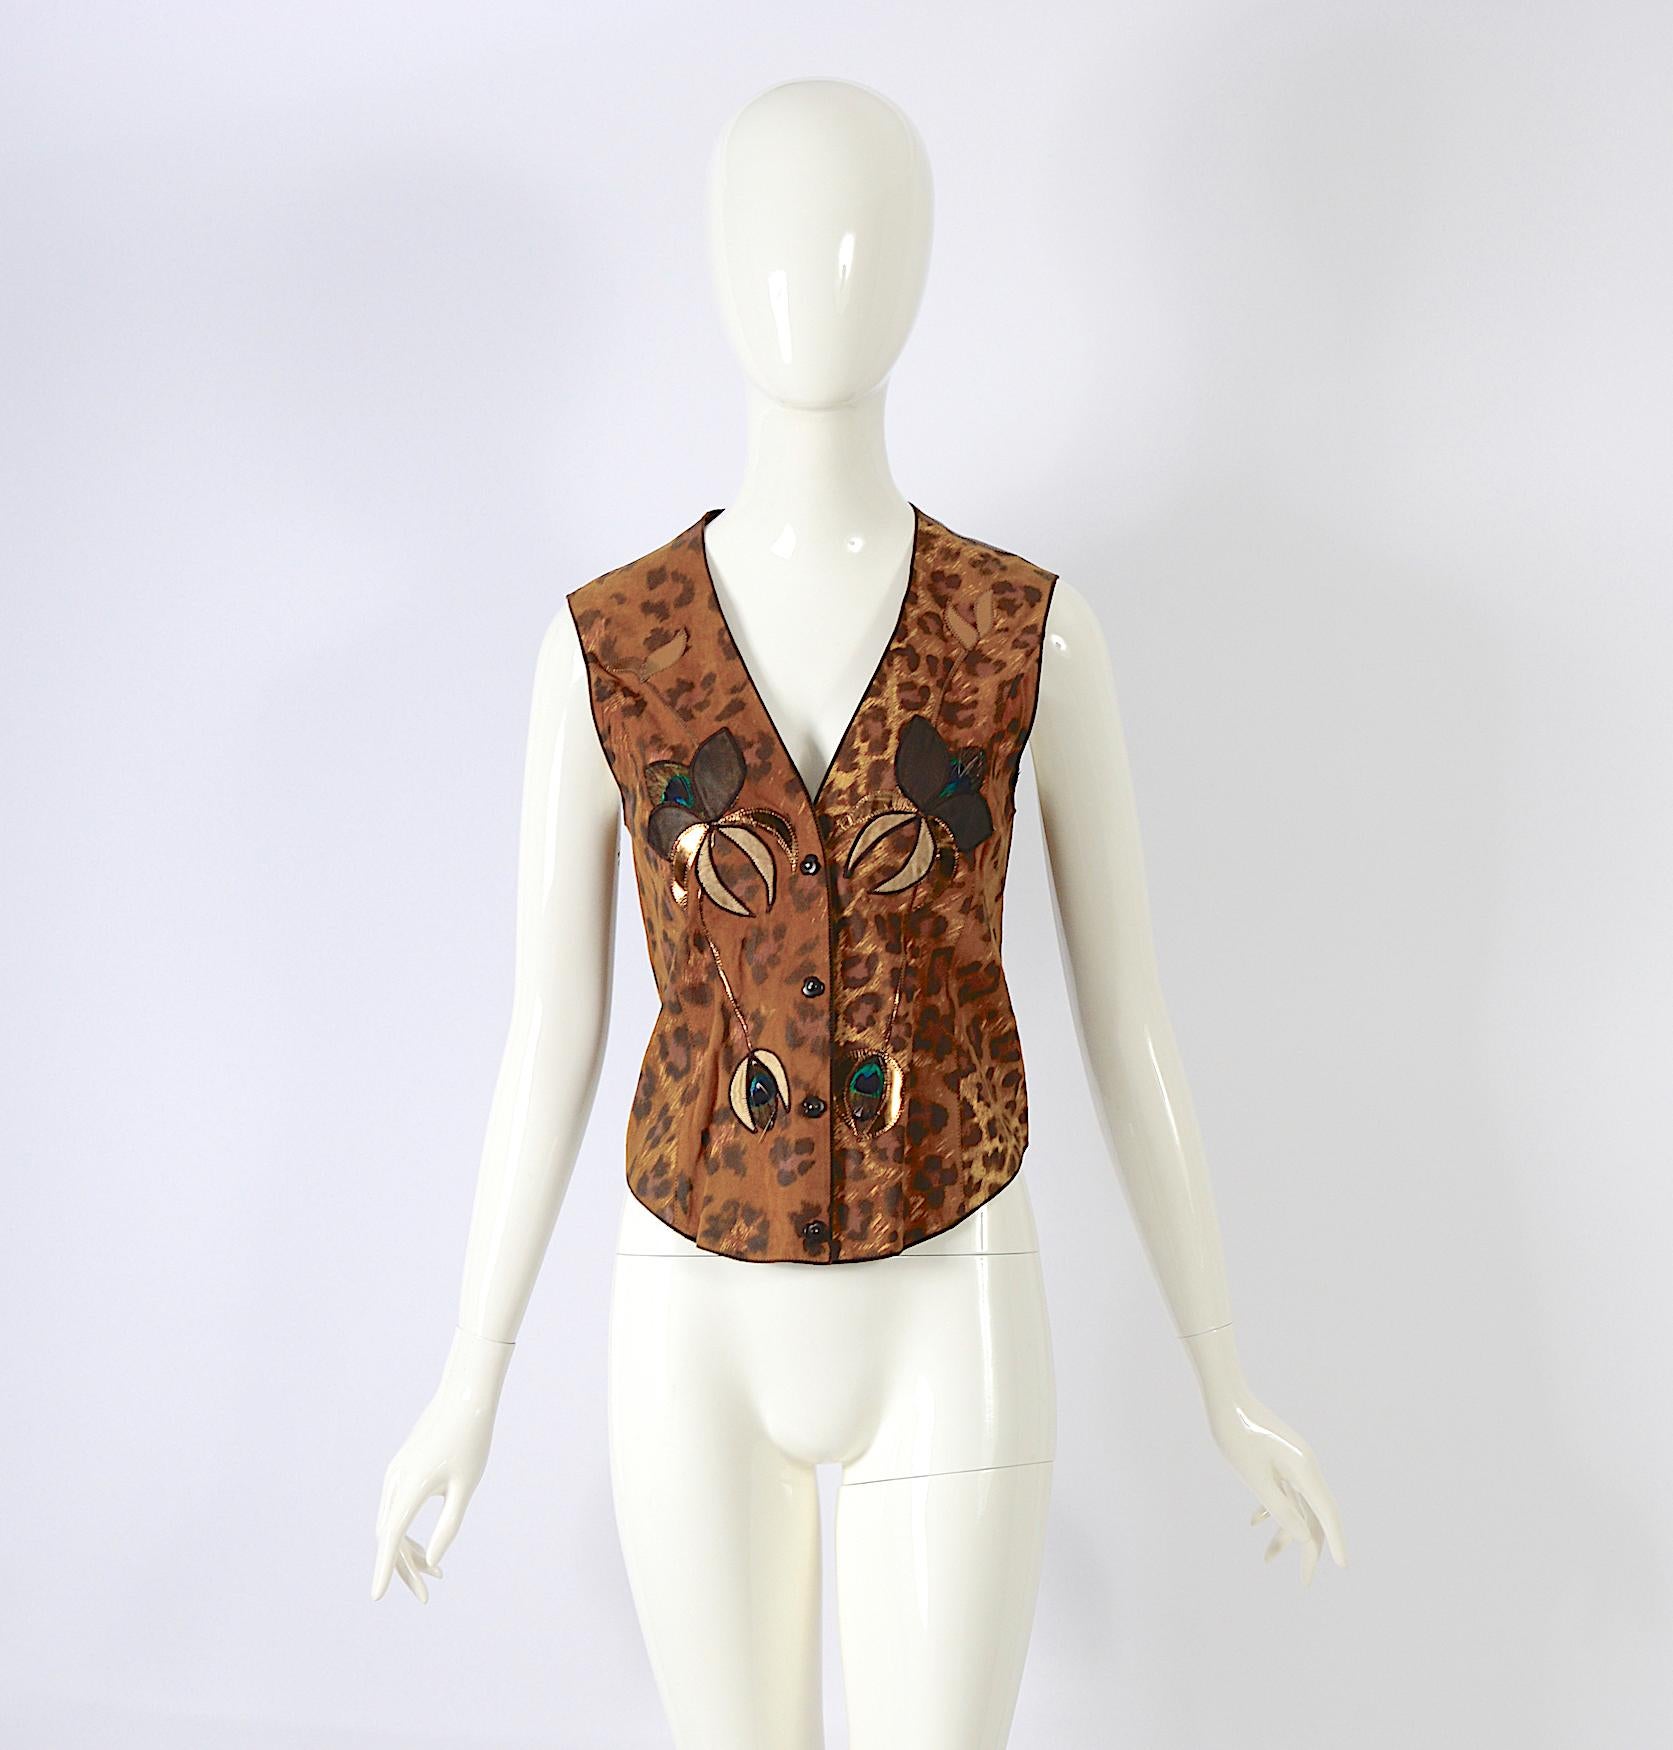 Roberto Cavalli 1970's Vintage Leather & Suede Patchwork Embellished Vest.
This is more than just a vests, it encapsulates the rich heritage of Roberto Cavalli's fashion history.
Roberto Cavalli first found recognition in the global fashion market